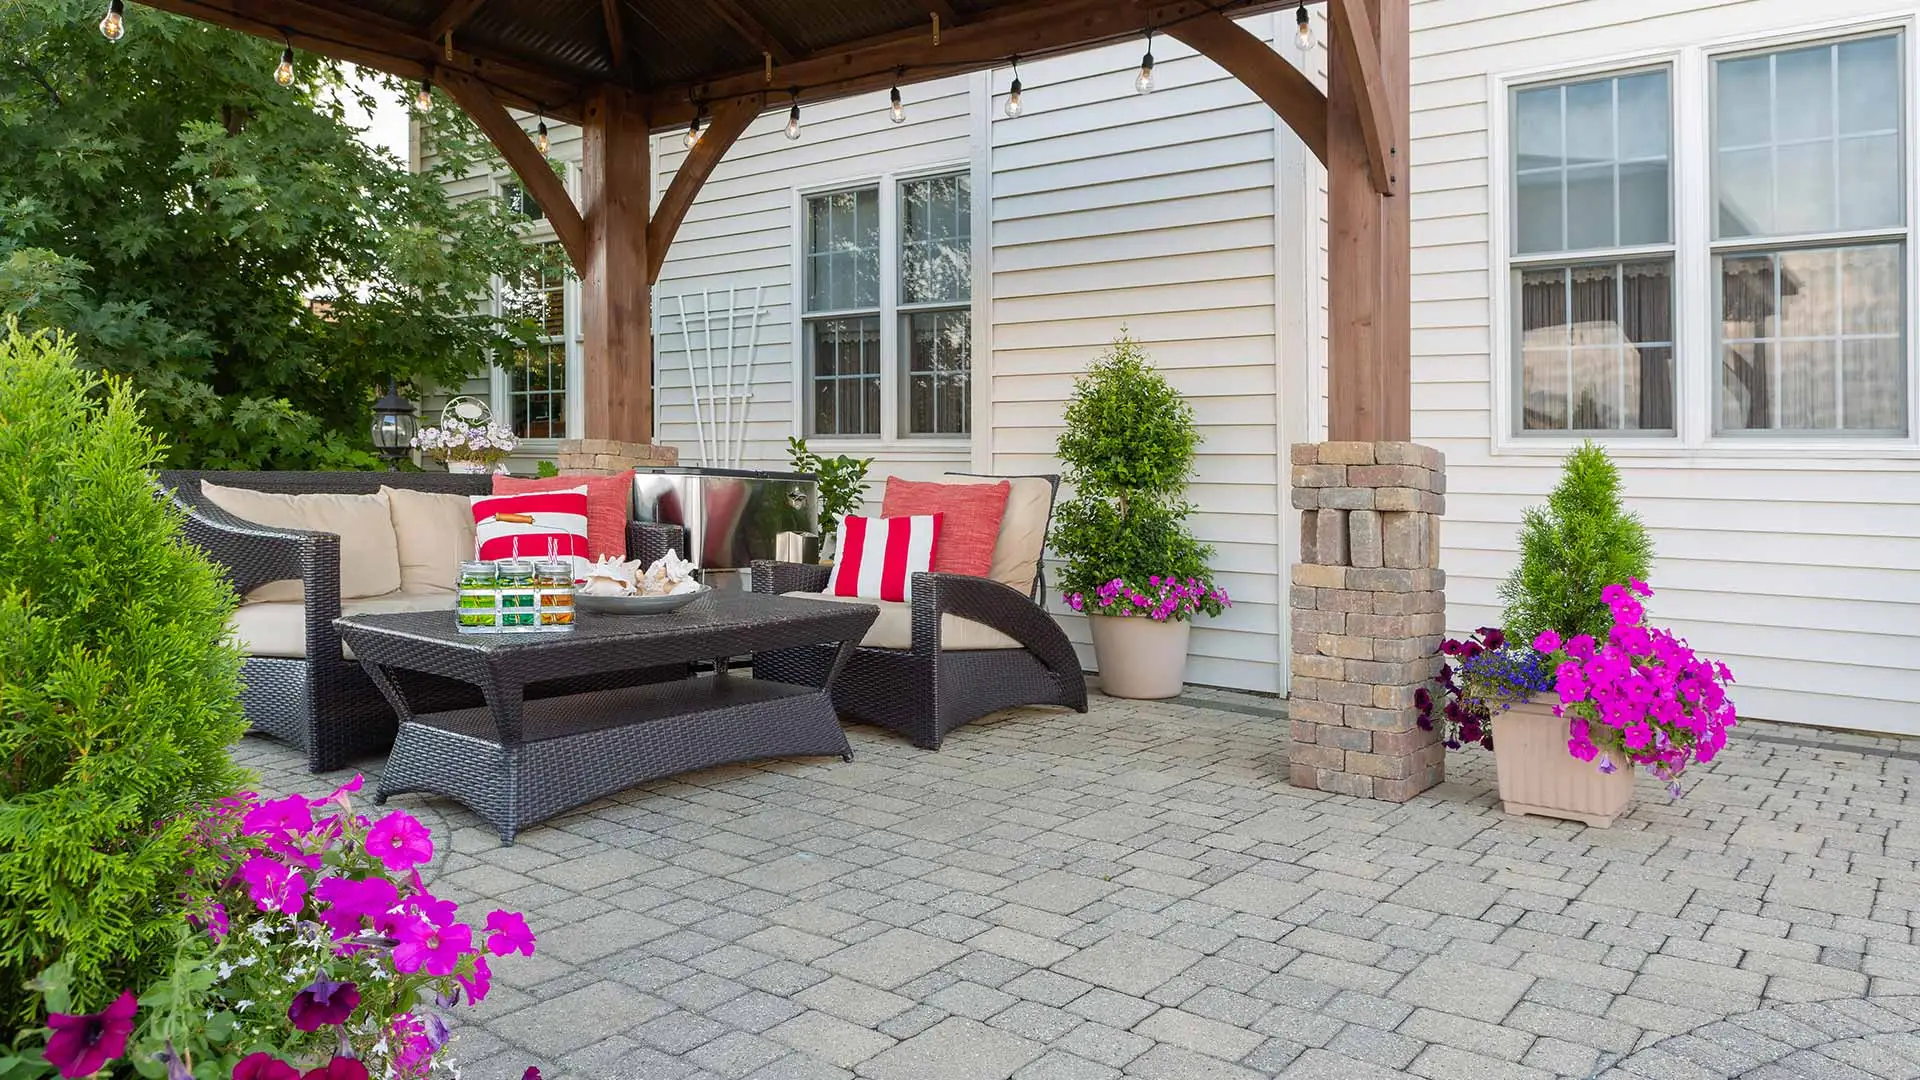 4 Paver Patterns to Consider When Designing Your New Patio